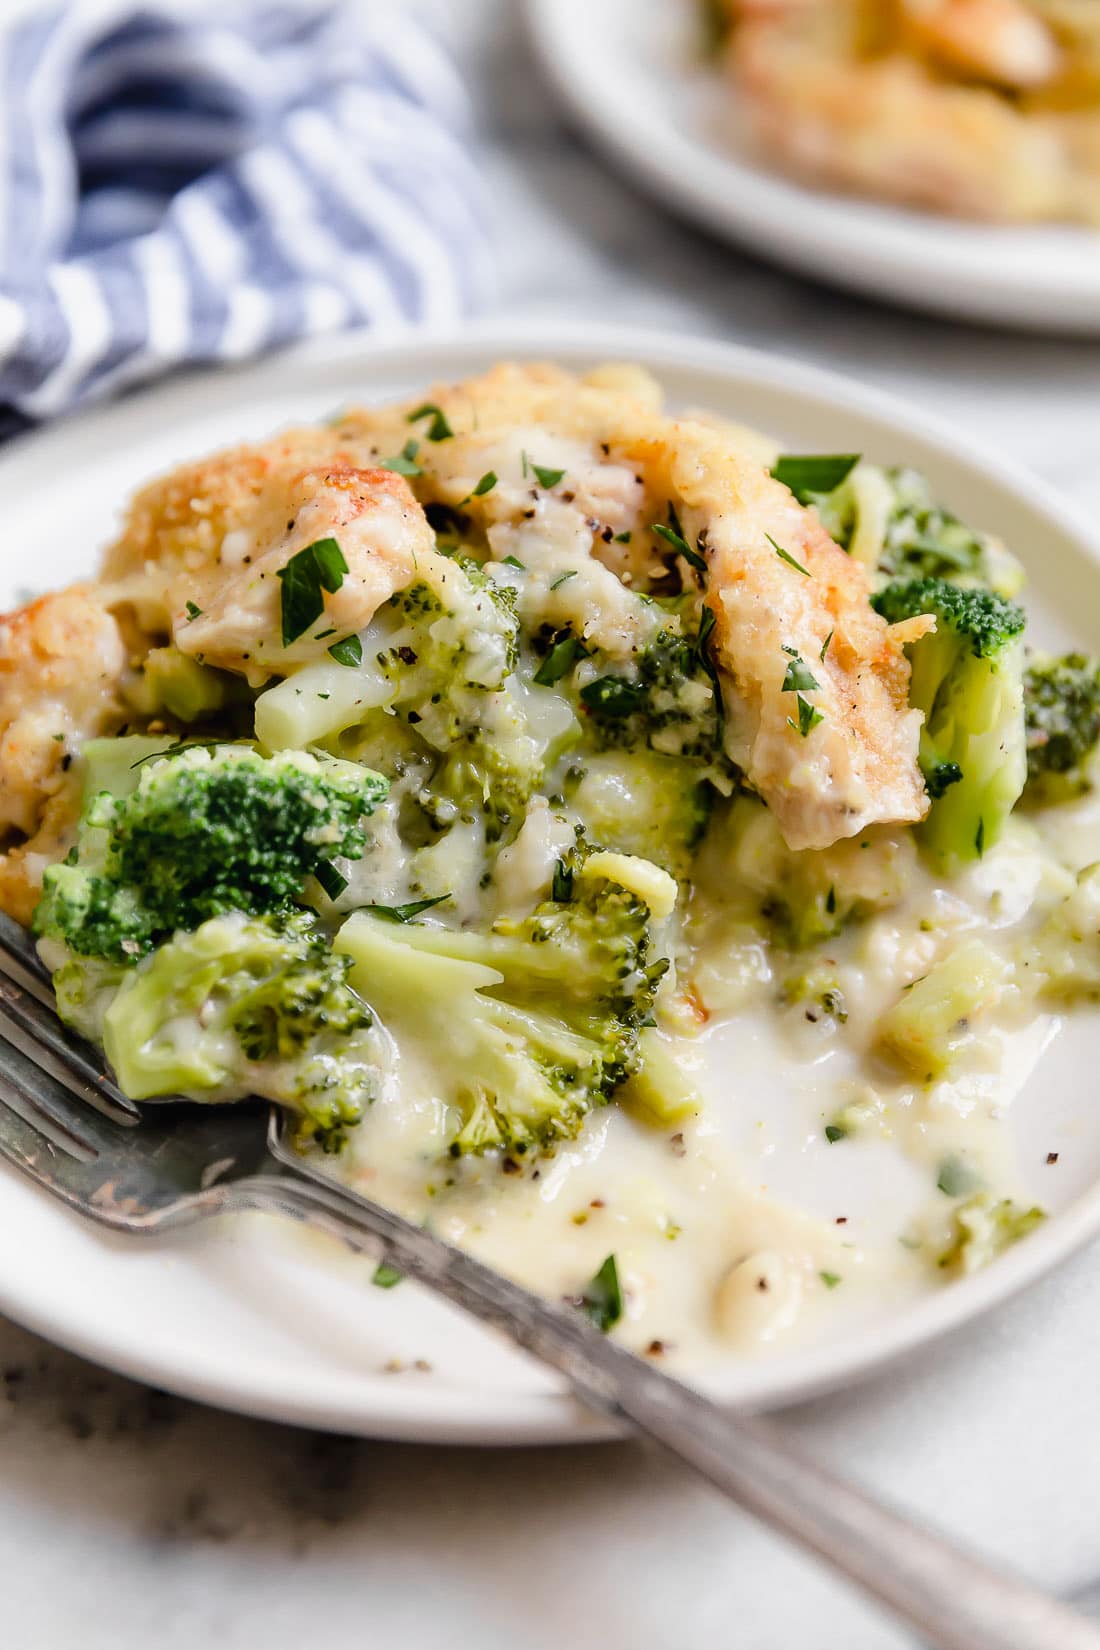 Broccoli Chicken Divan 2: Everything You Need to Know